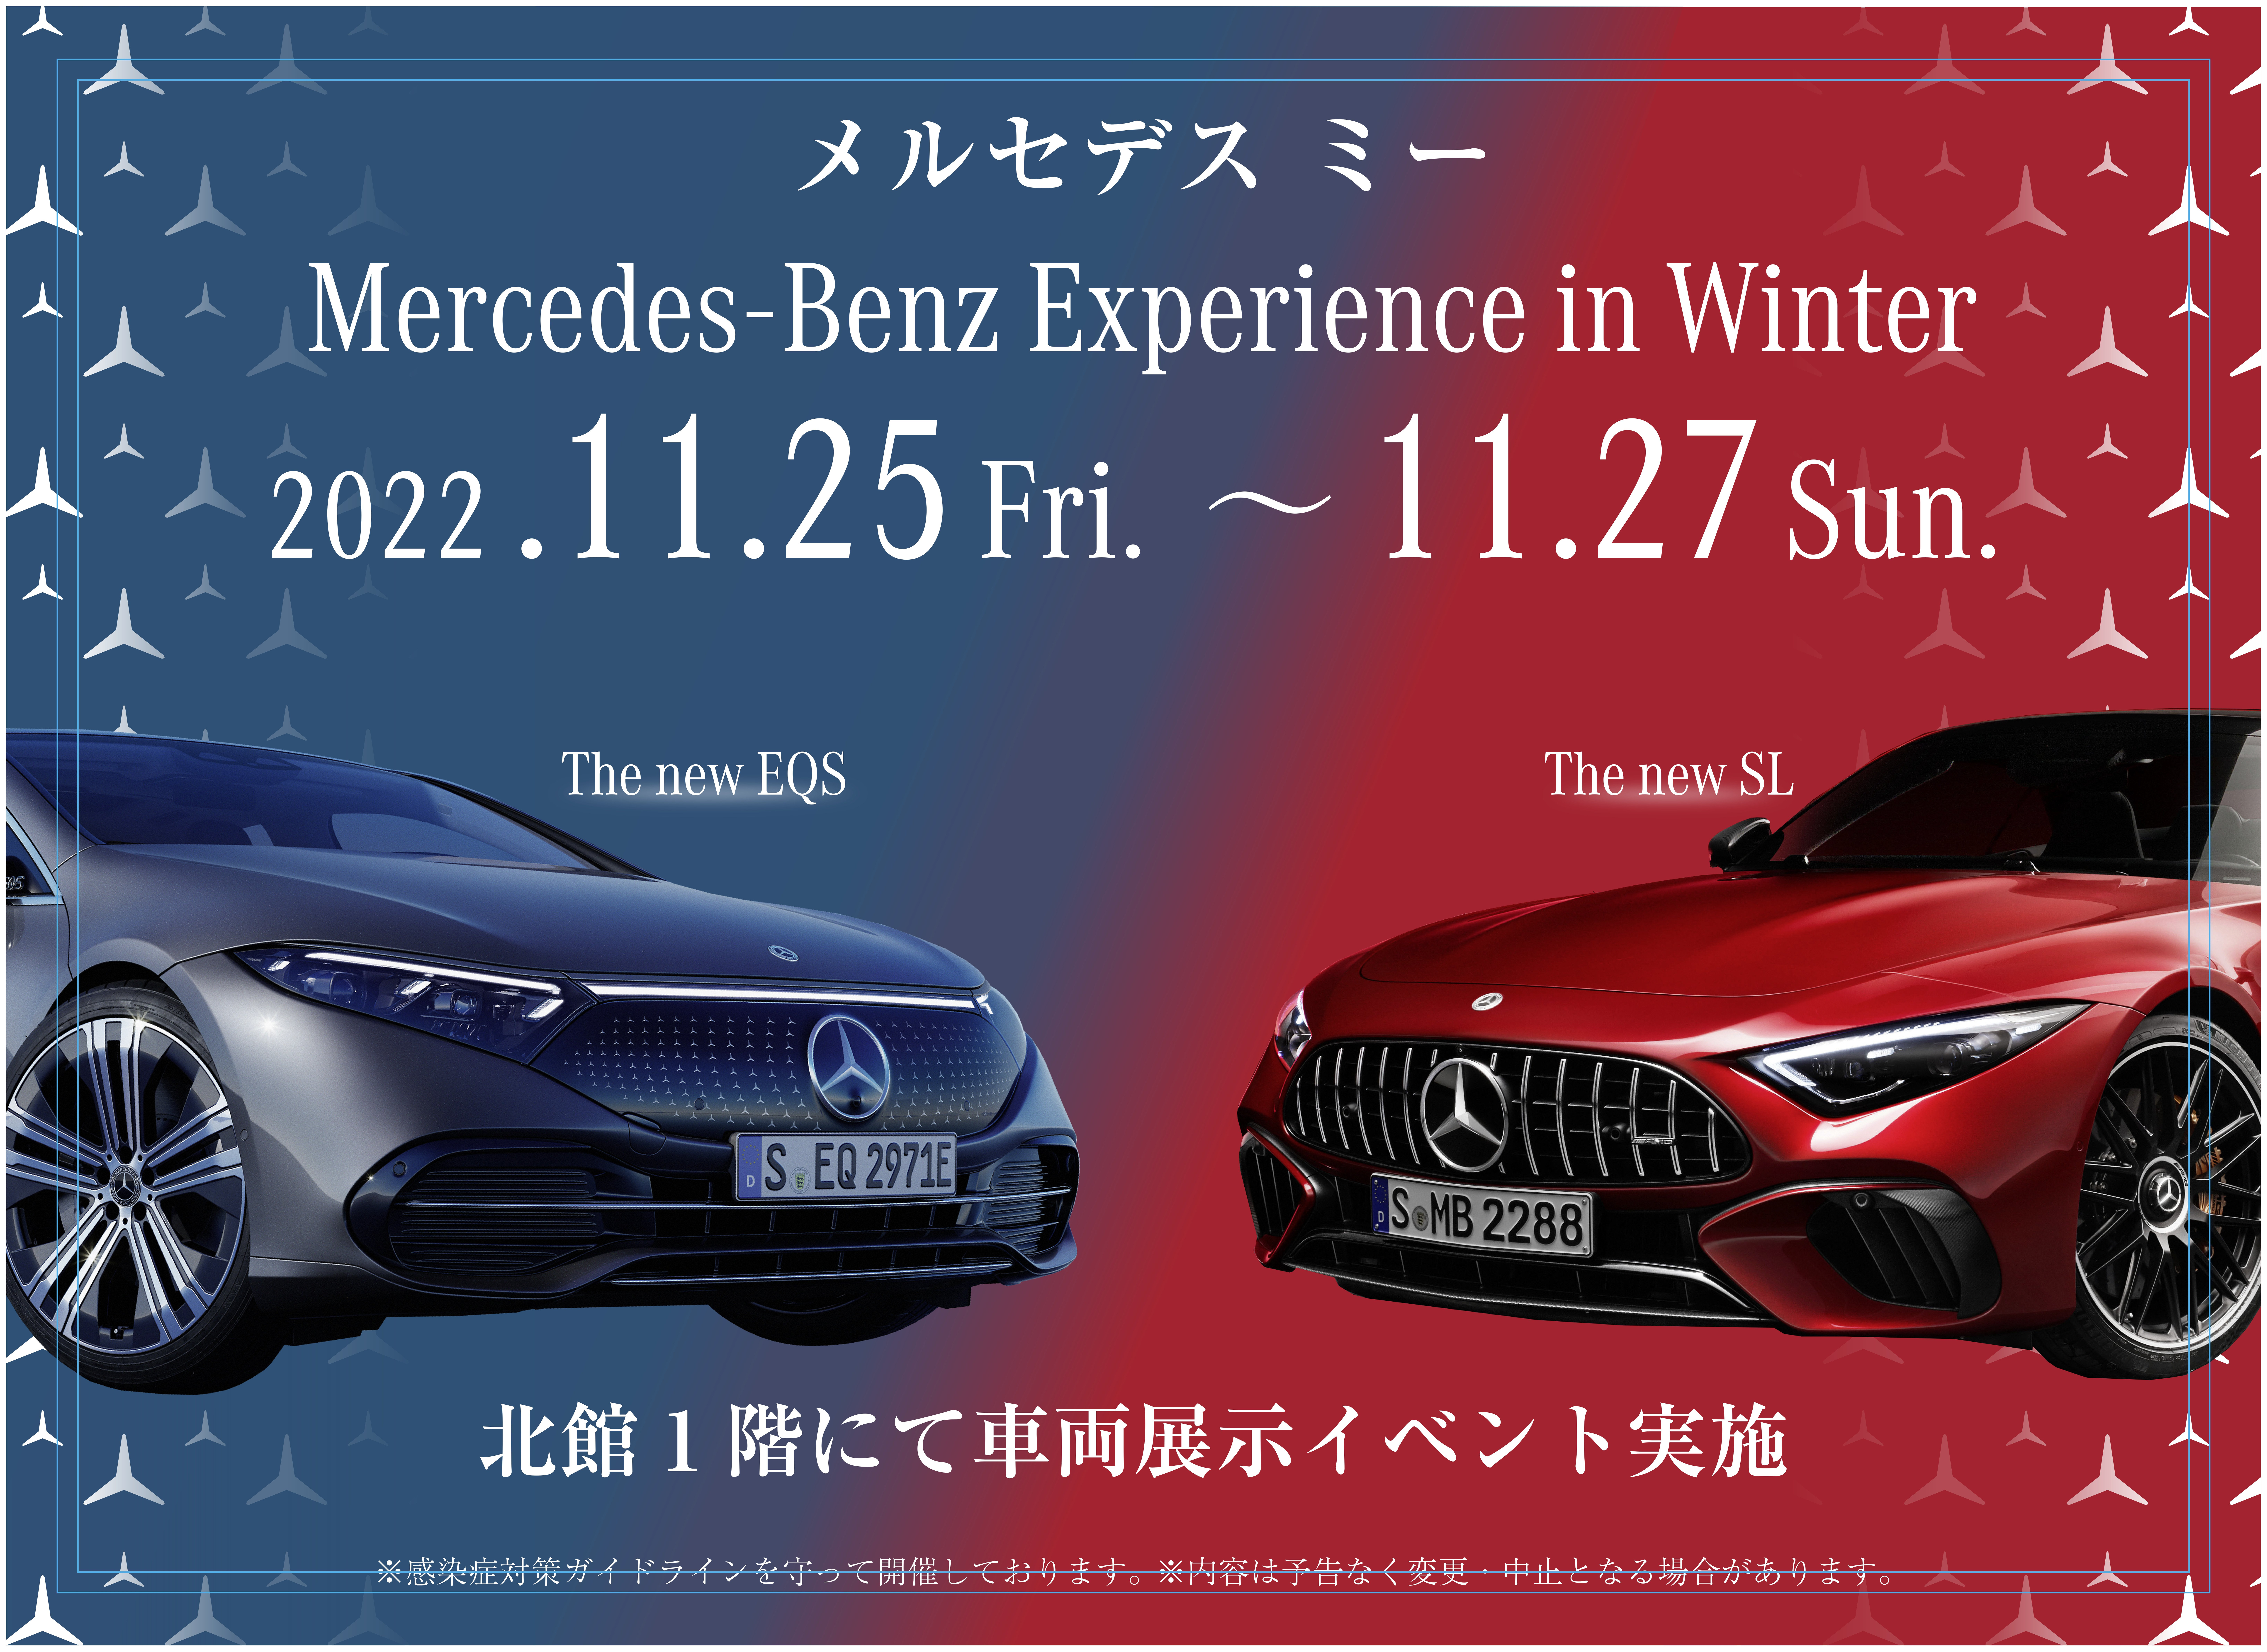 Mercedes-Benz Experience in Winter